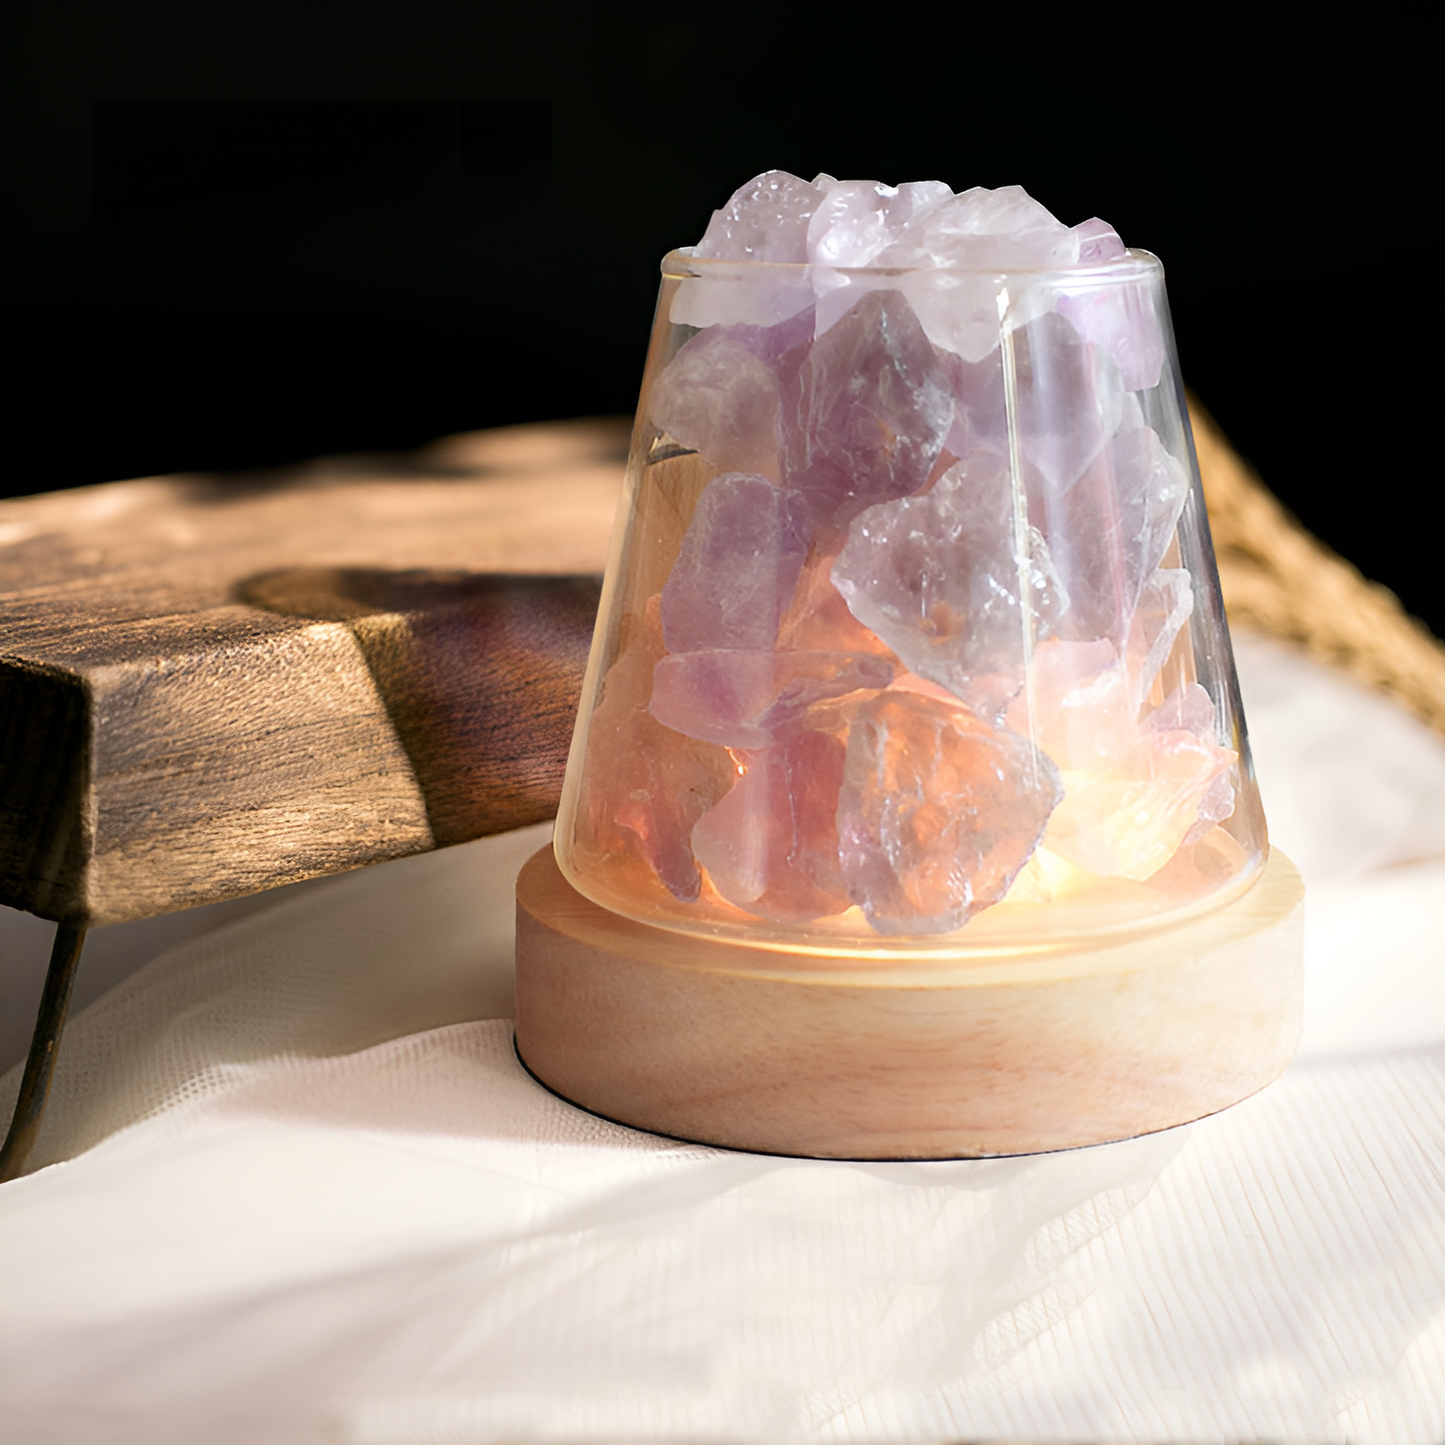 Crystal Healing Amethyst Crystal Oil Diffuser Protection Stone